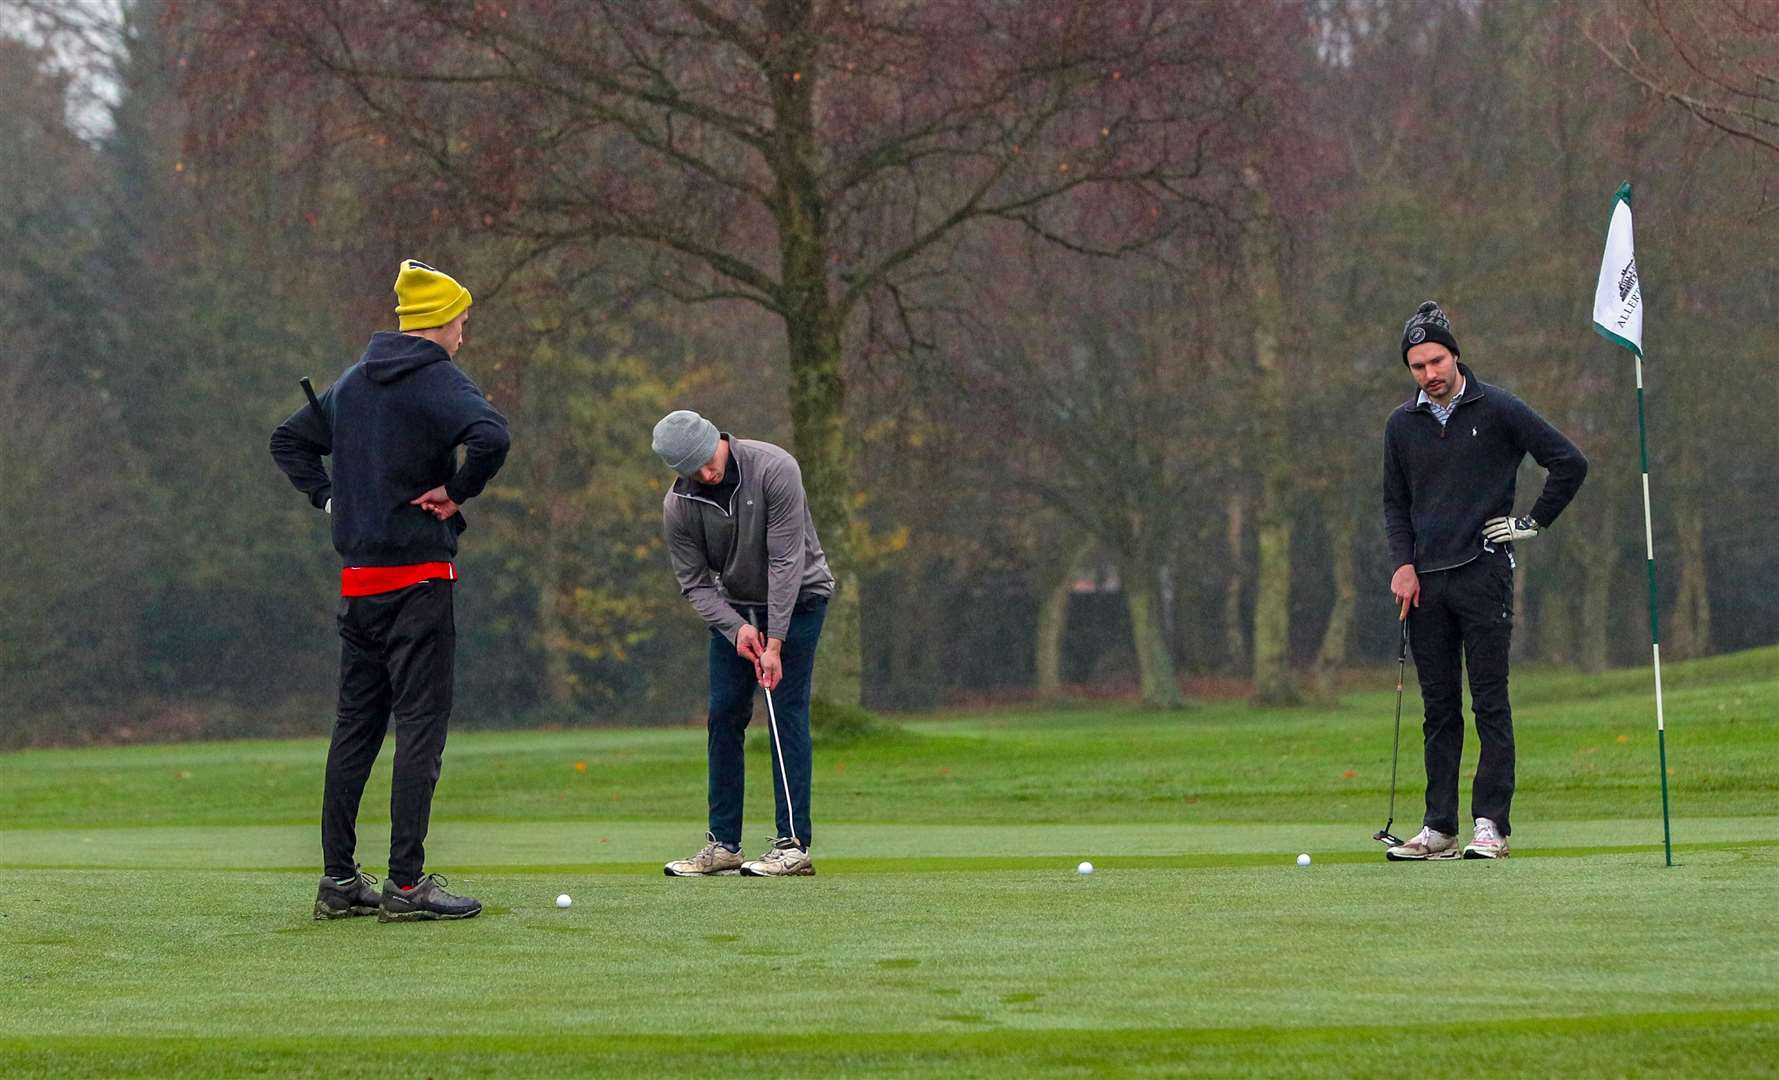 Members of Allerton Manor Golf Club in Liverpool took advantage of the relaxation of restrictions (Peter Byrne/PA)